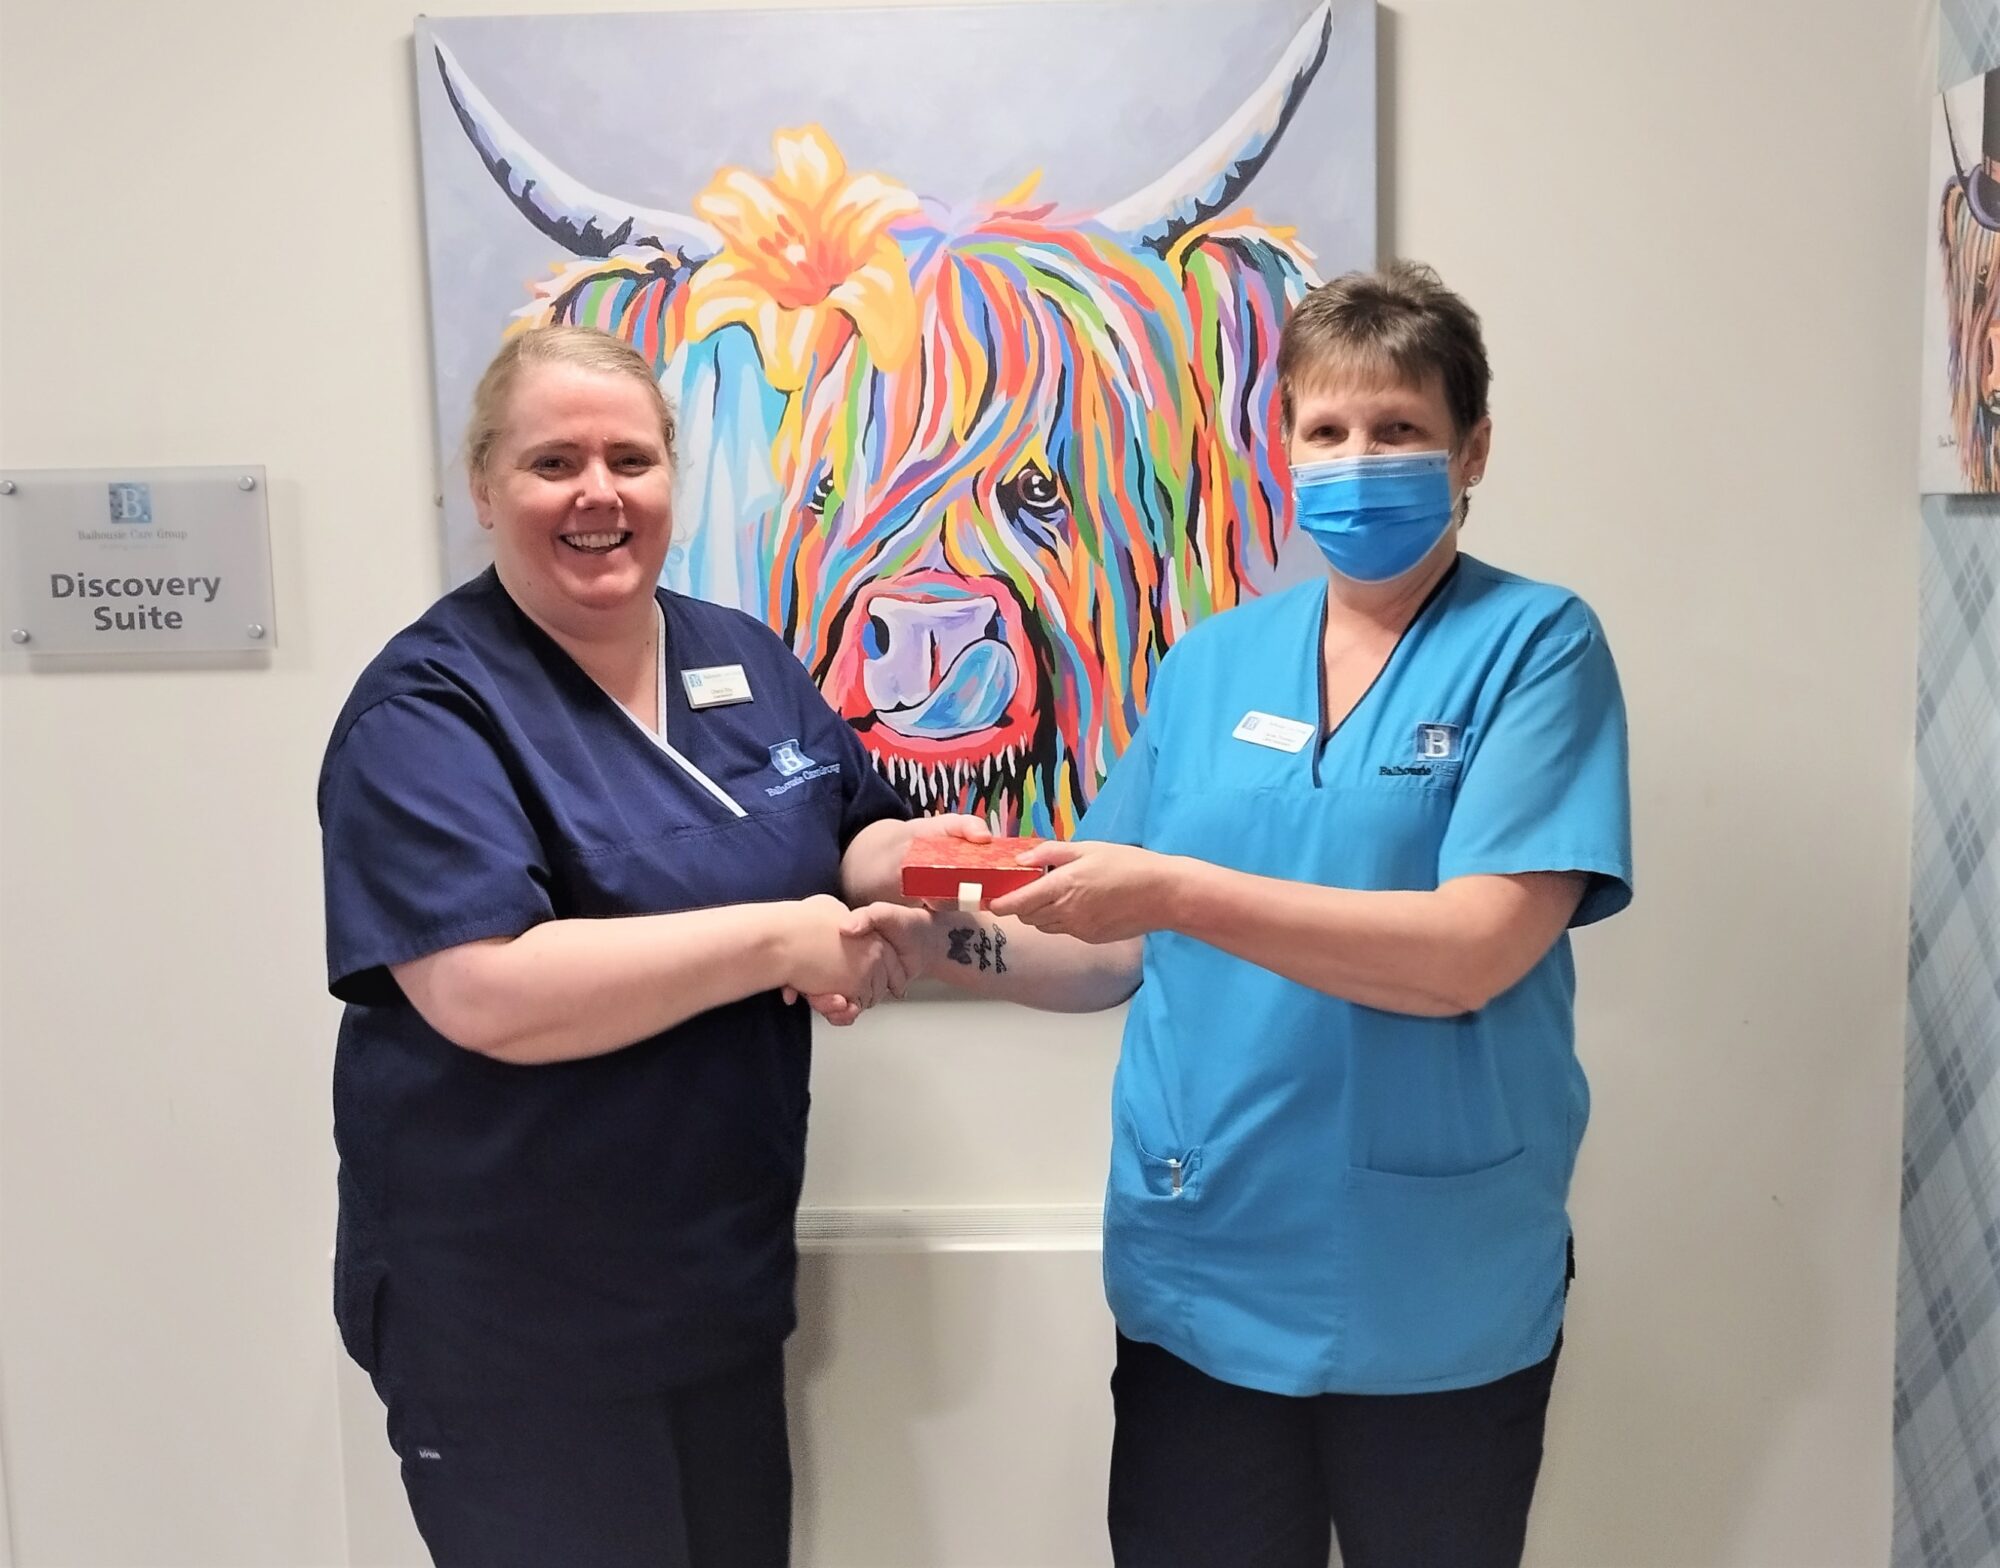 Brew Monday voucher winner Carole Thomson, a Care Assistant from Clement Park with Home Manager Cheryl Roy.